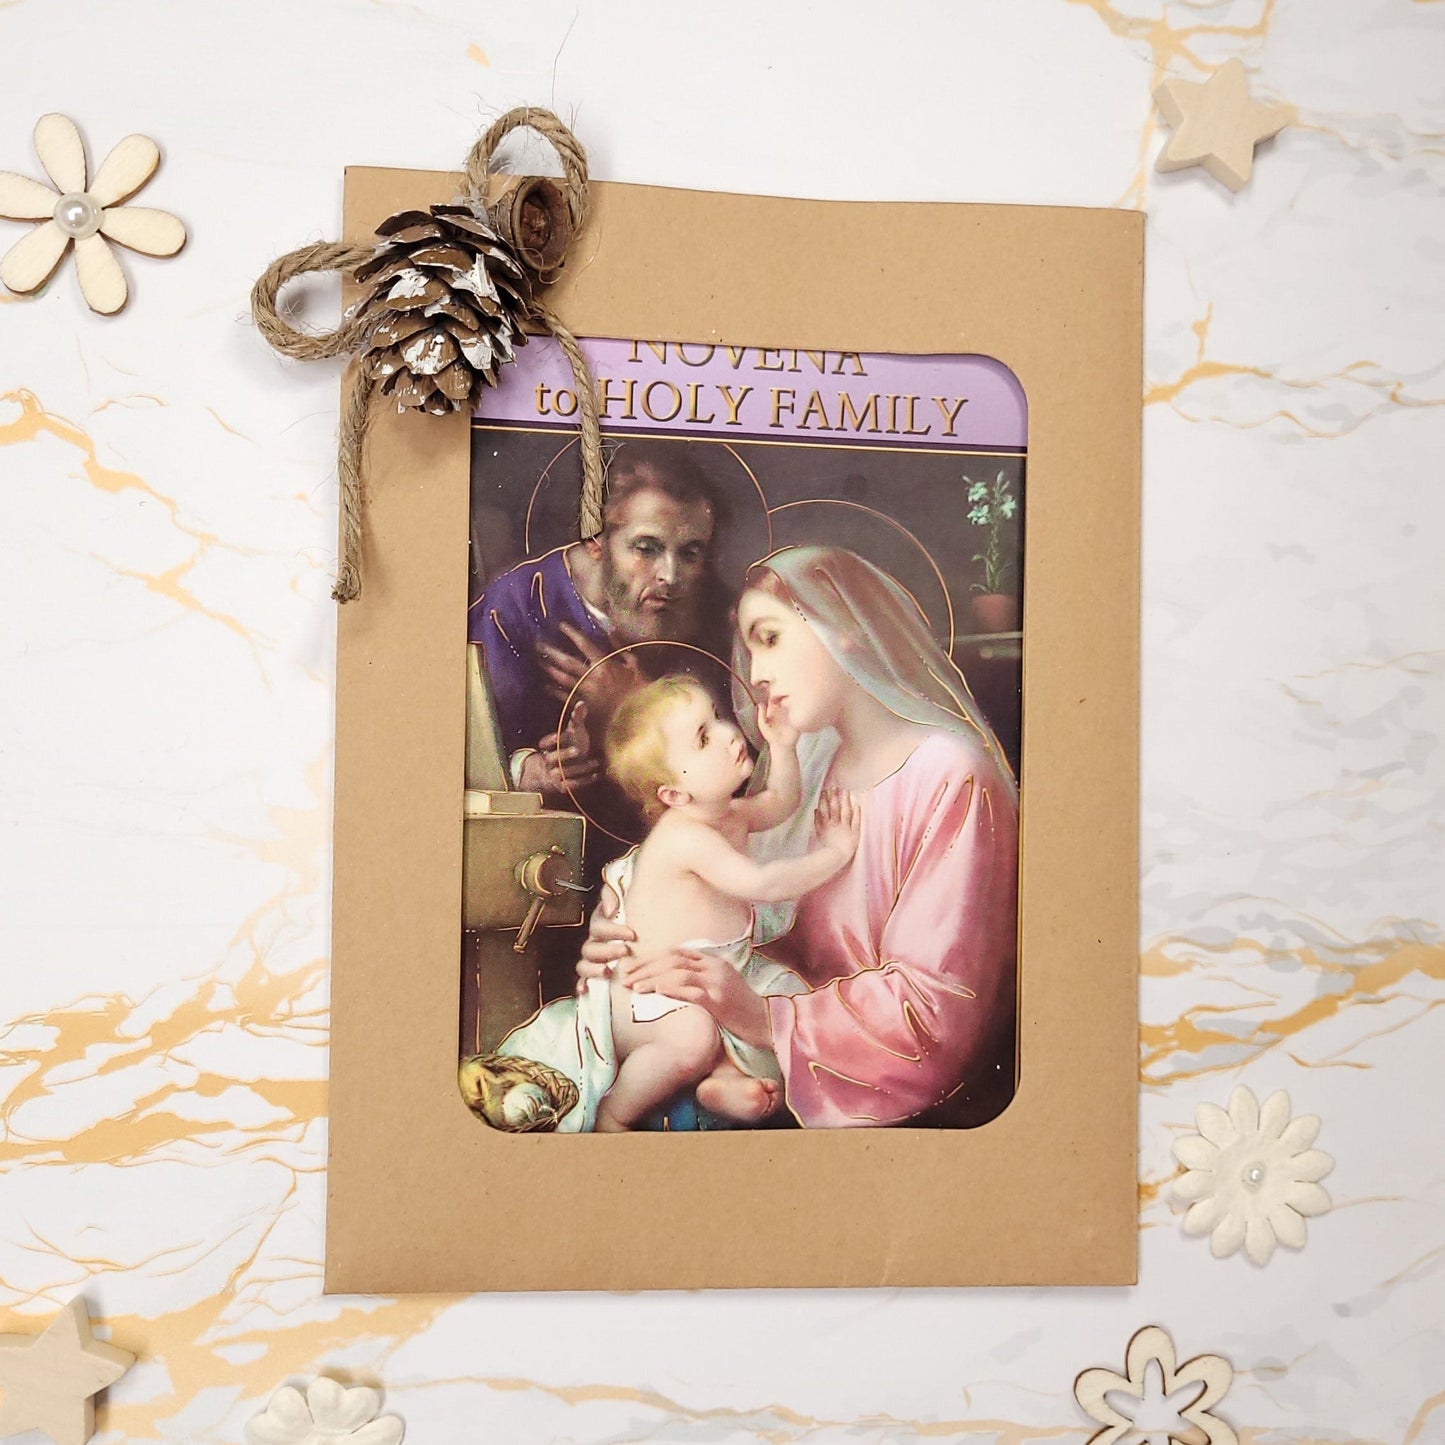 Saint Joseph, Protector of the Holy Family Box - Our Lady of Gifts